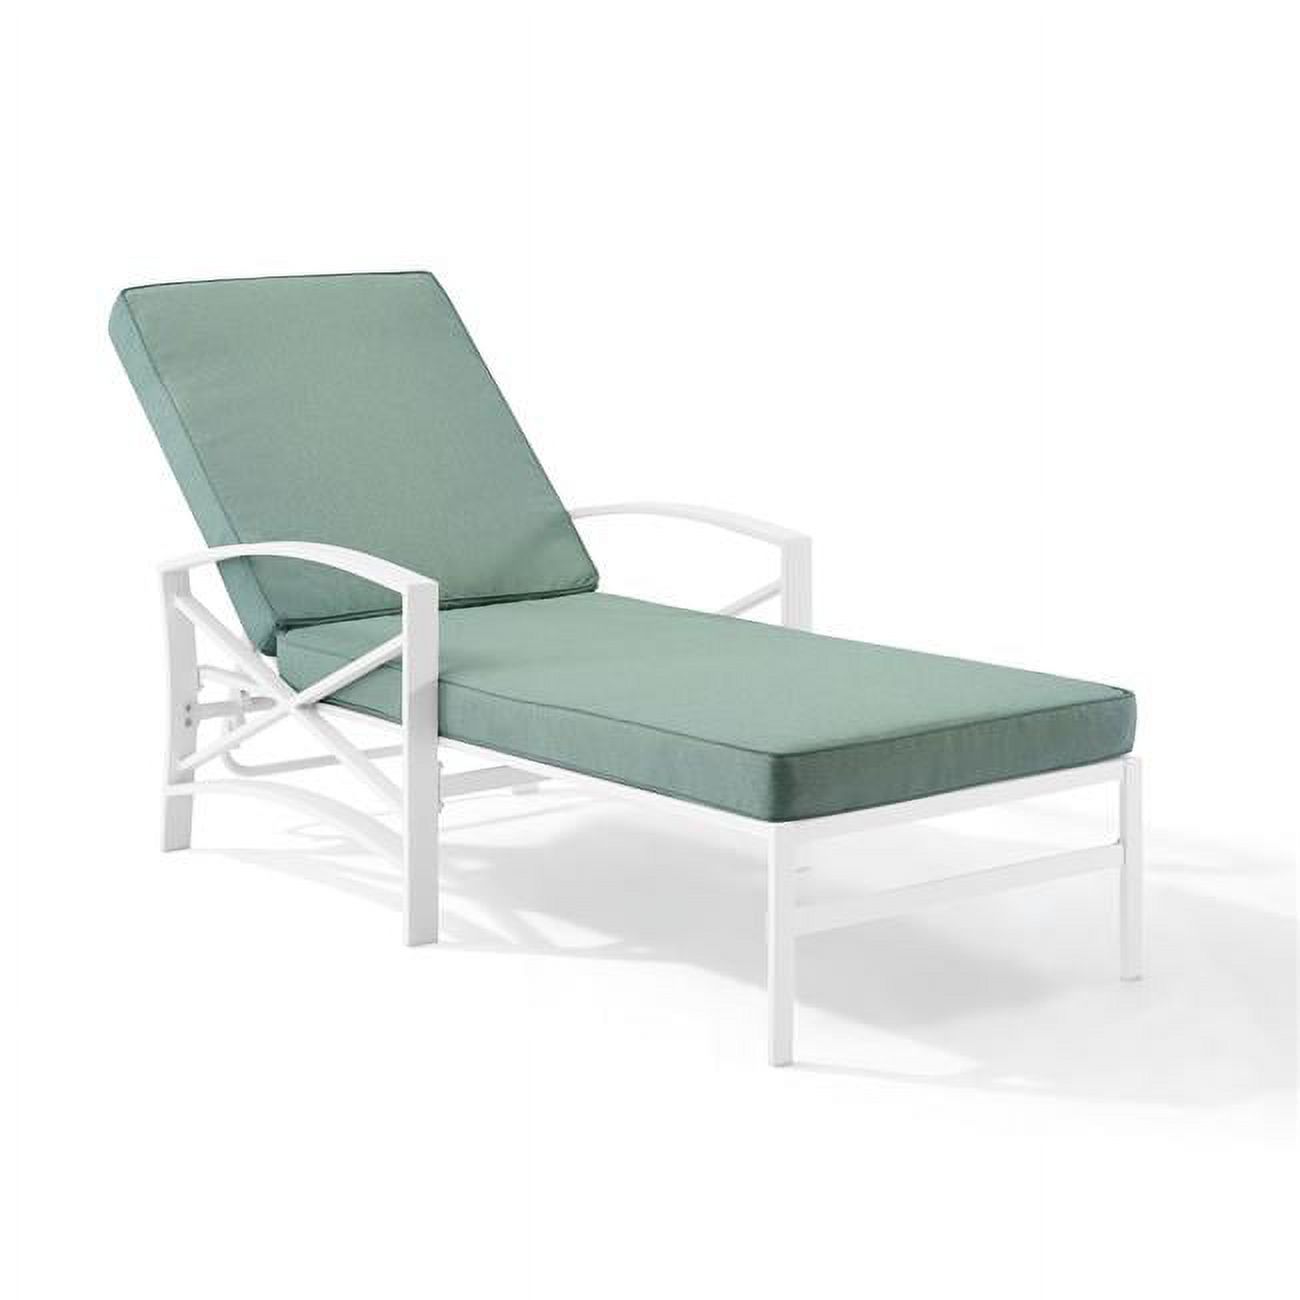 Crosley Kaplan Metal Patio Chaise Lounge in Mist and White - image 1 of 10